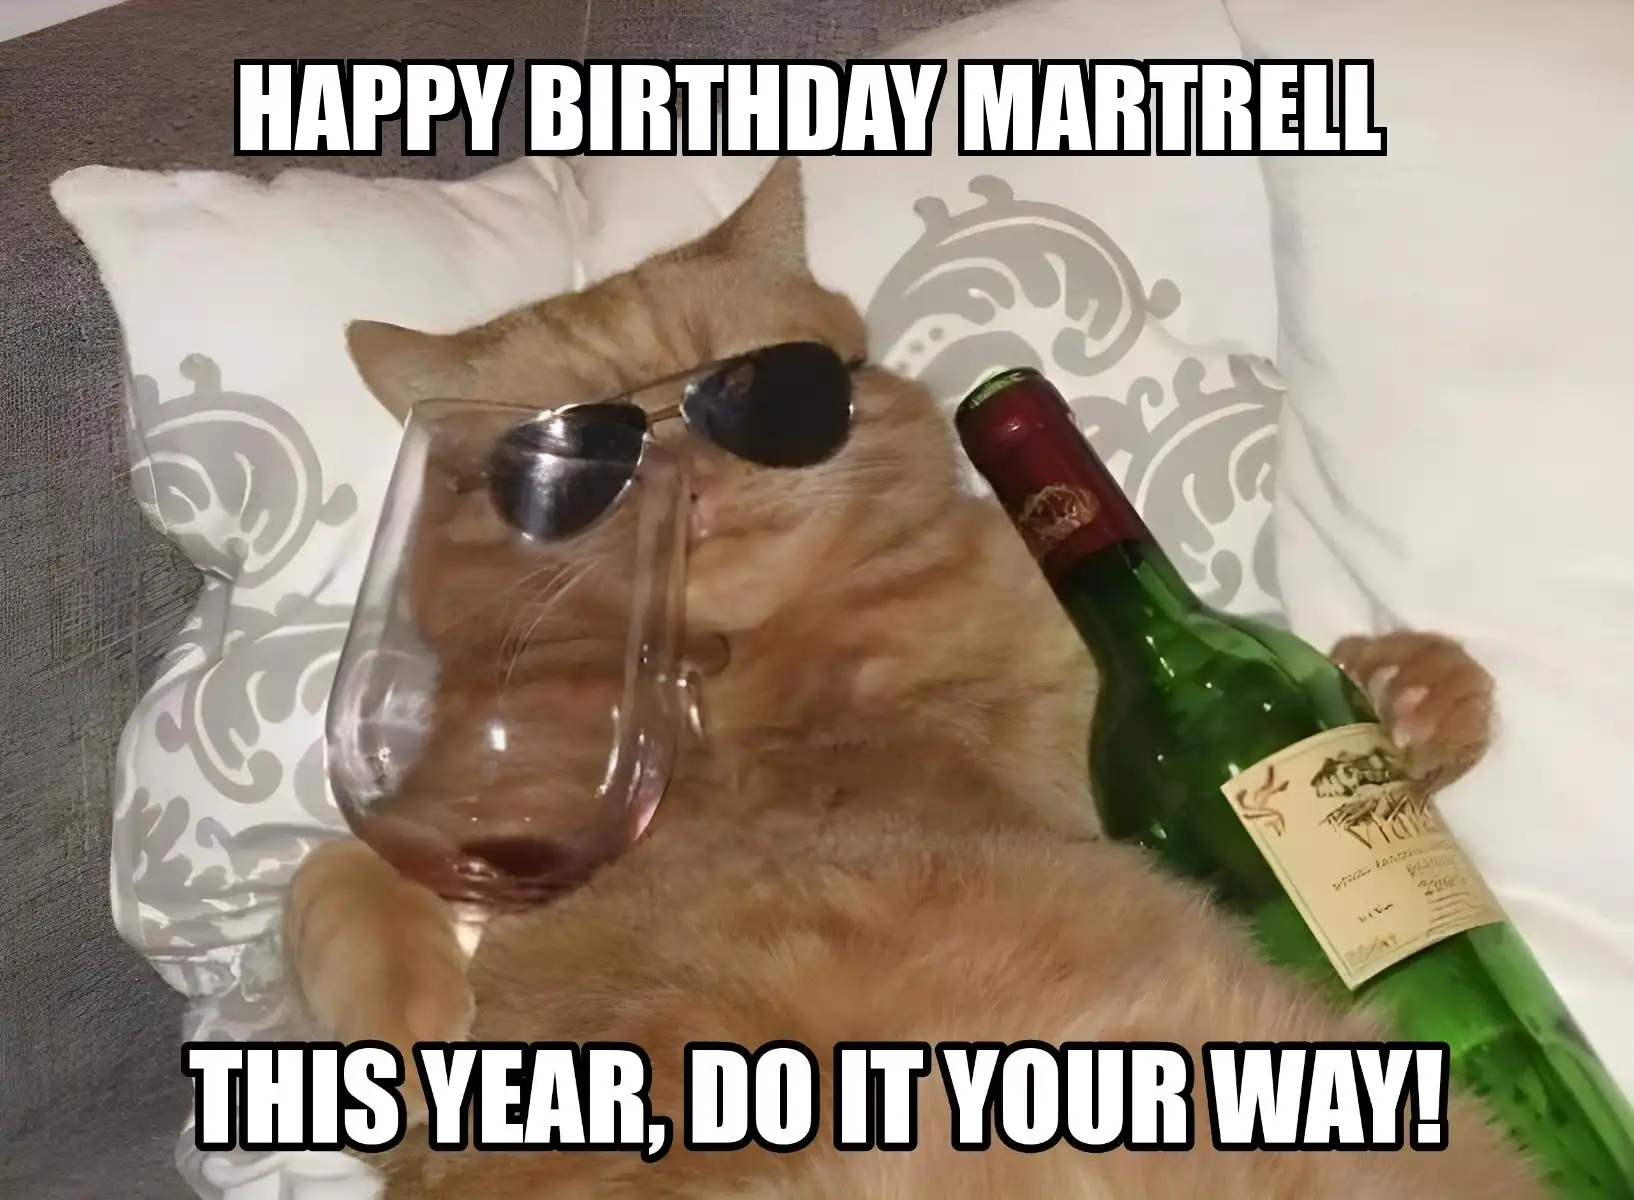 Happy Birthday Martrell This Year Do It Your Way Meme